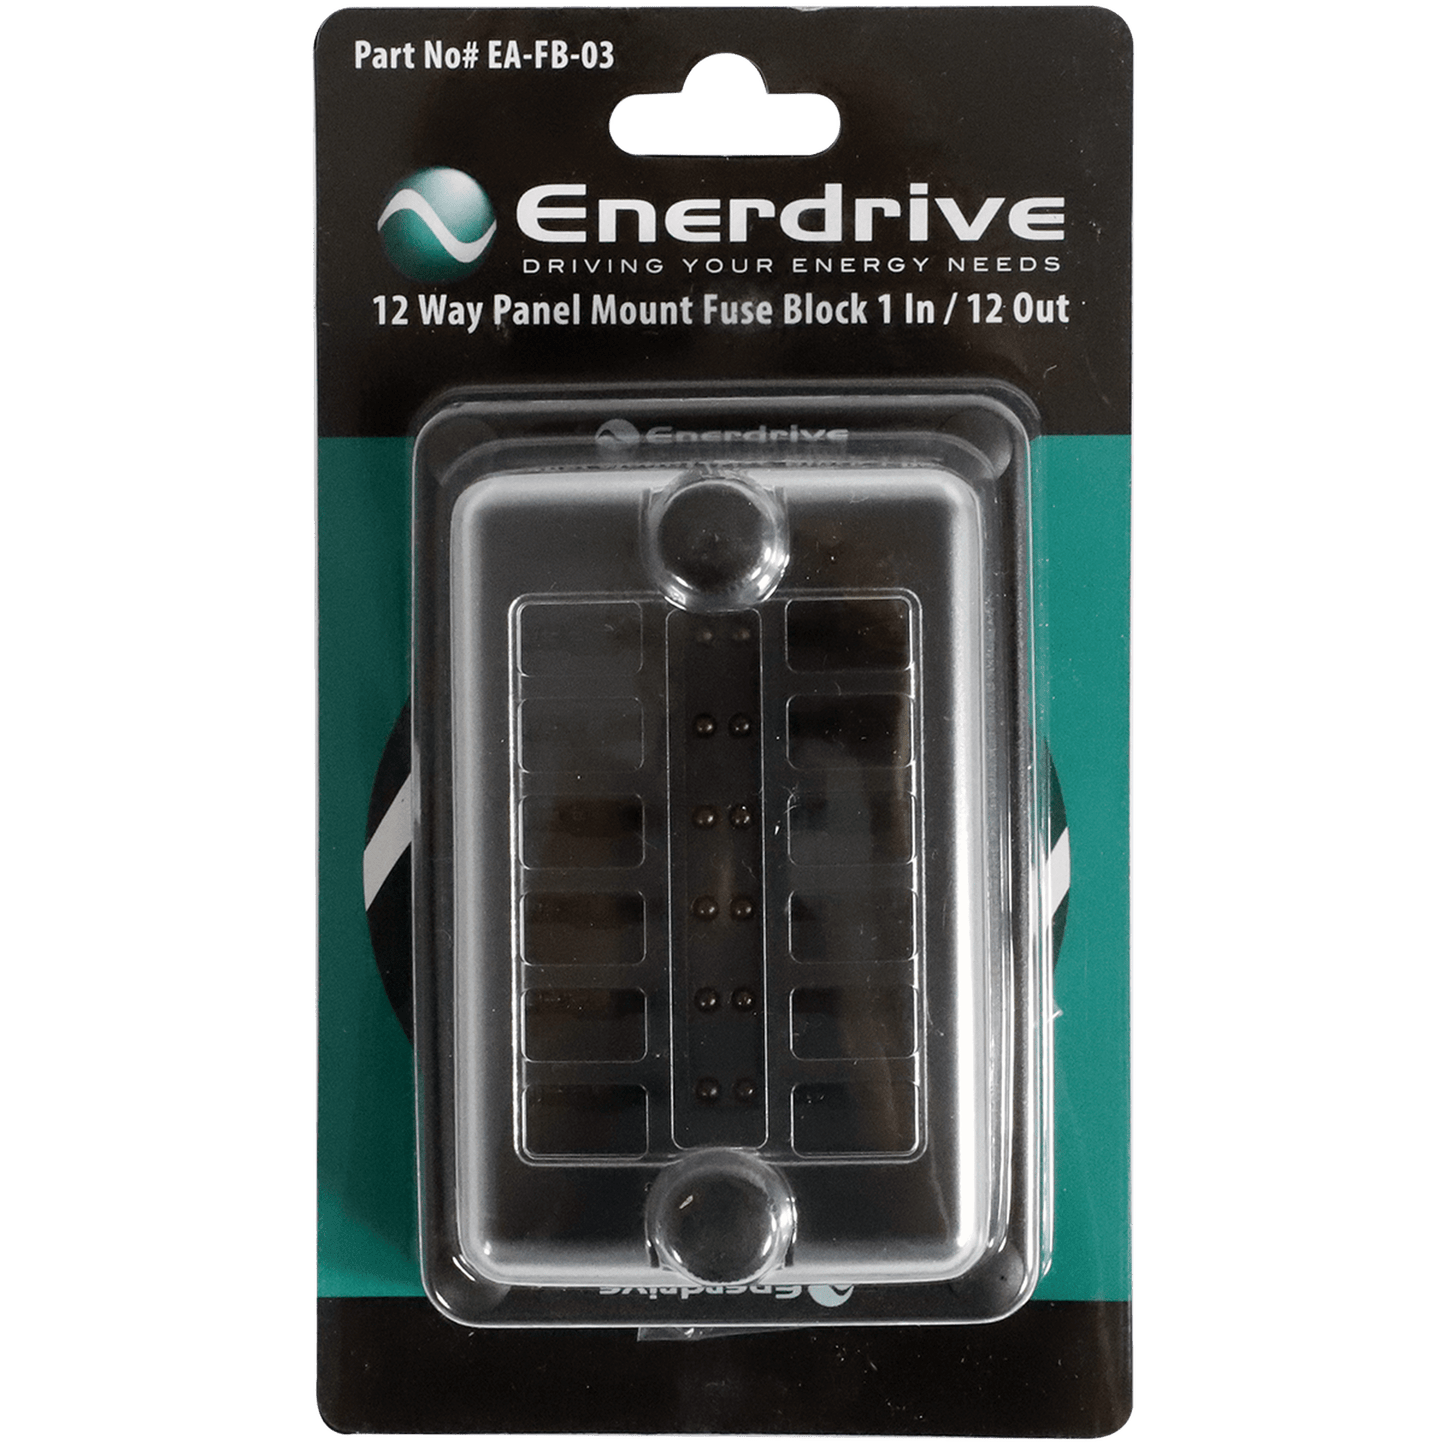 Enerdrive Fuse Block Panel Mount 1 In 12 Out with LEDs